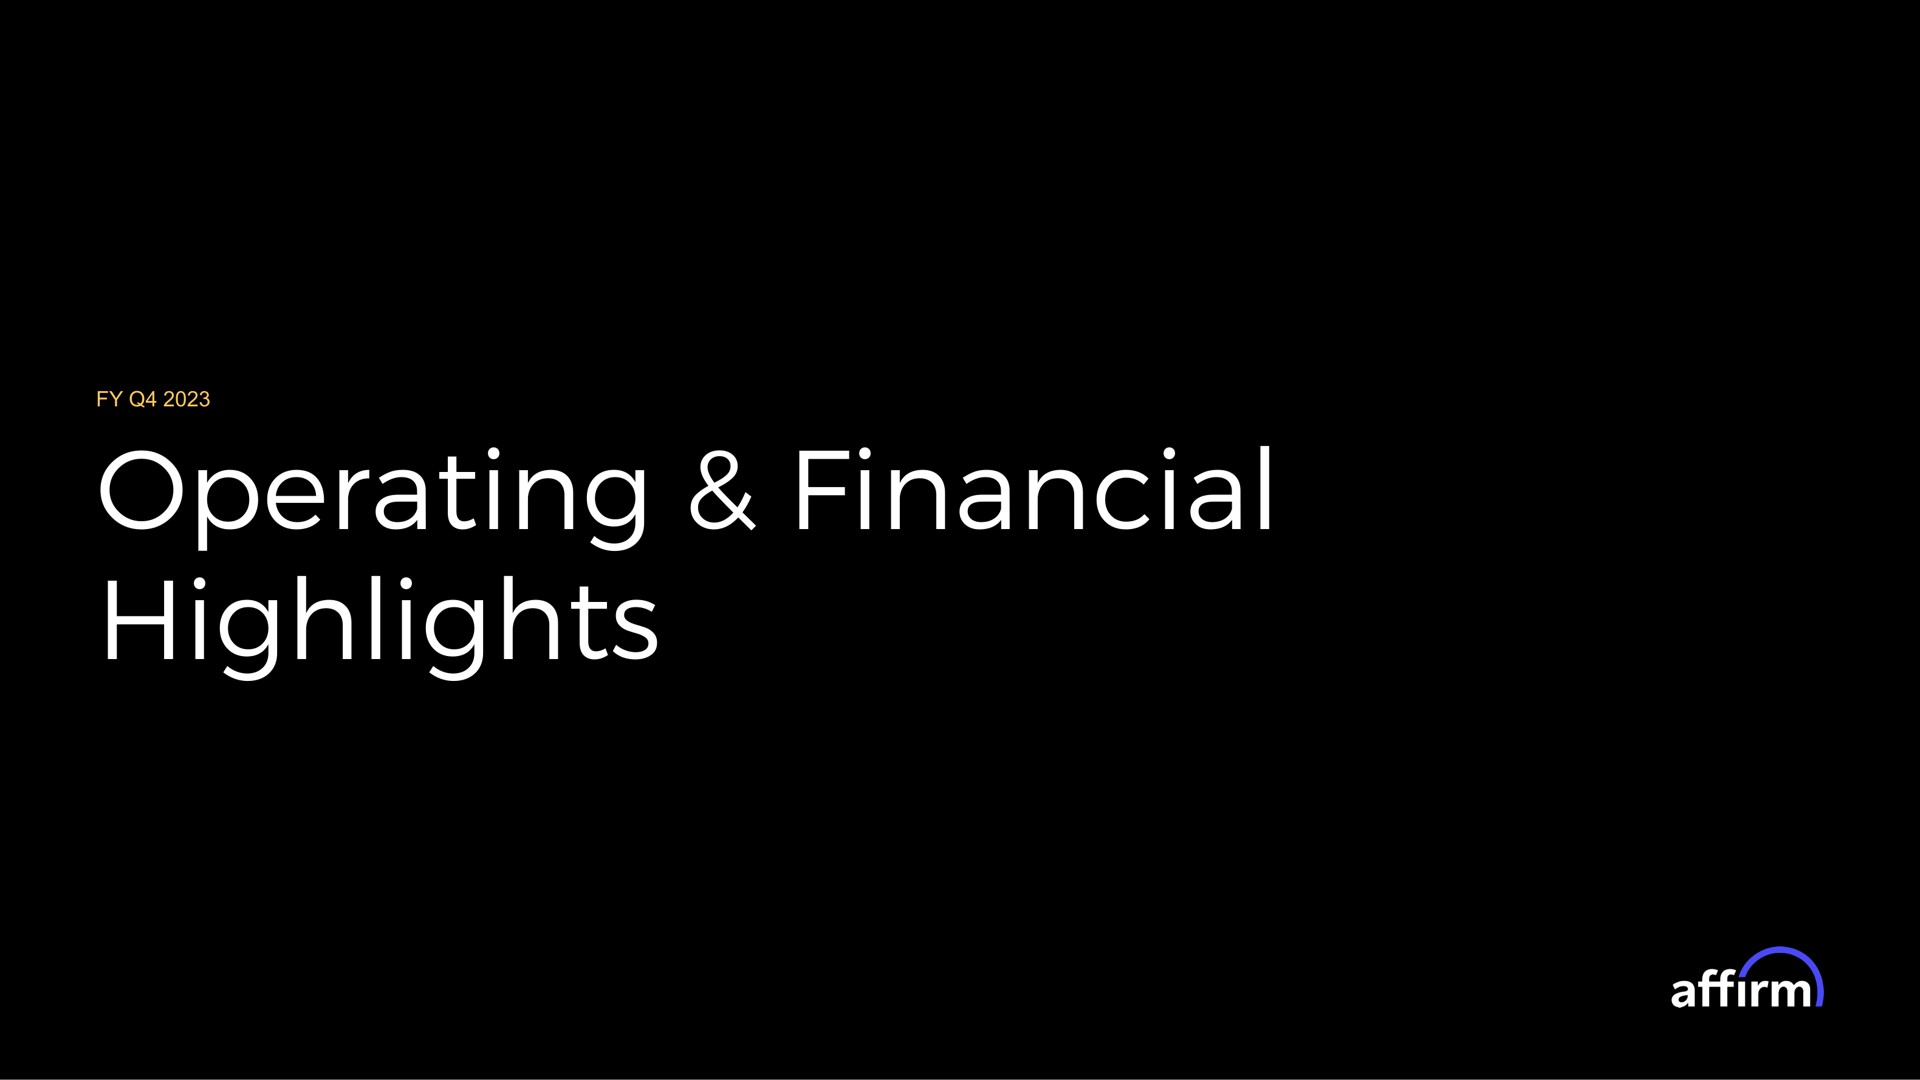 operating financial highlights | Affirm